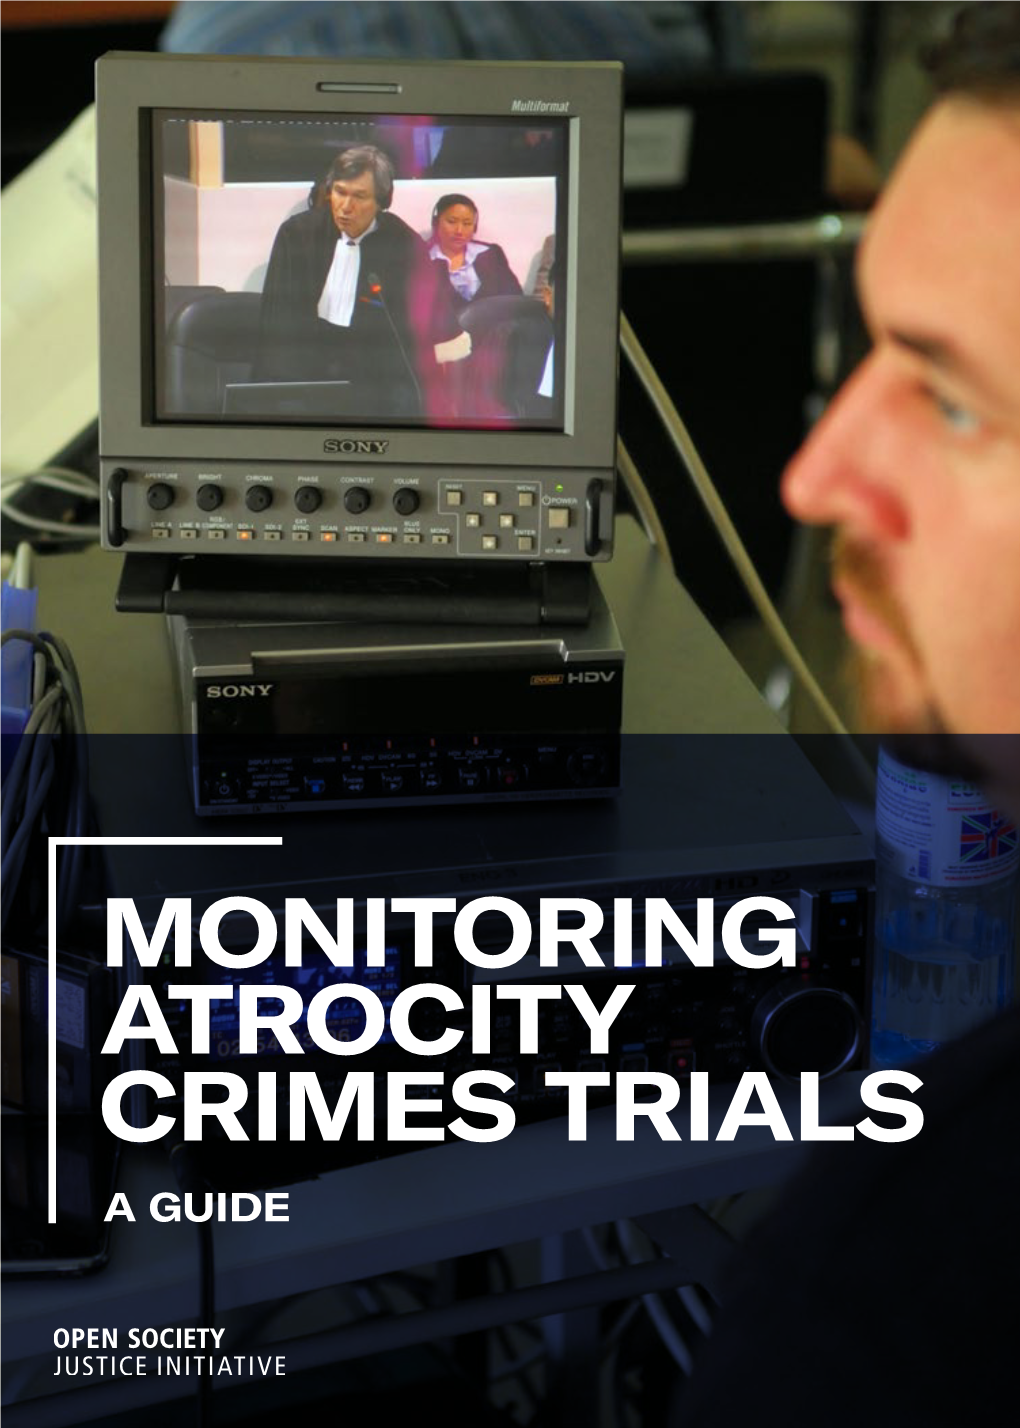 MONITORING ATROCITY CRIMES TRIALS a GUIDE Copyright © 2020 Open Society Foundations